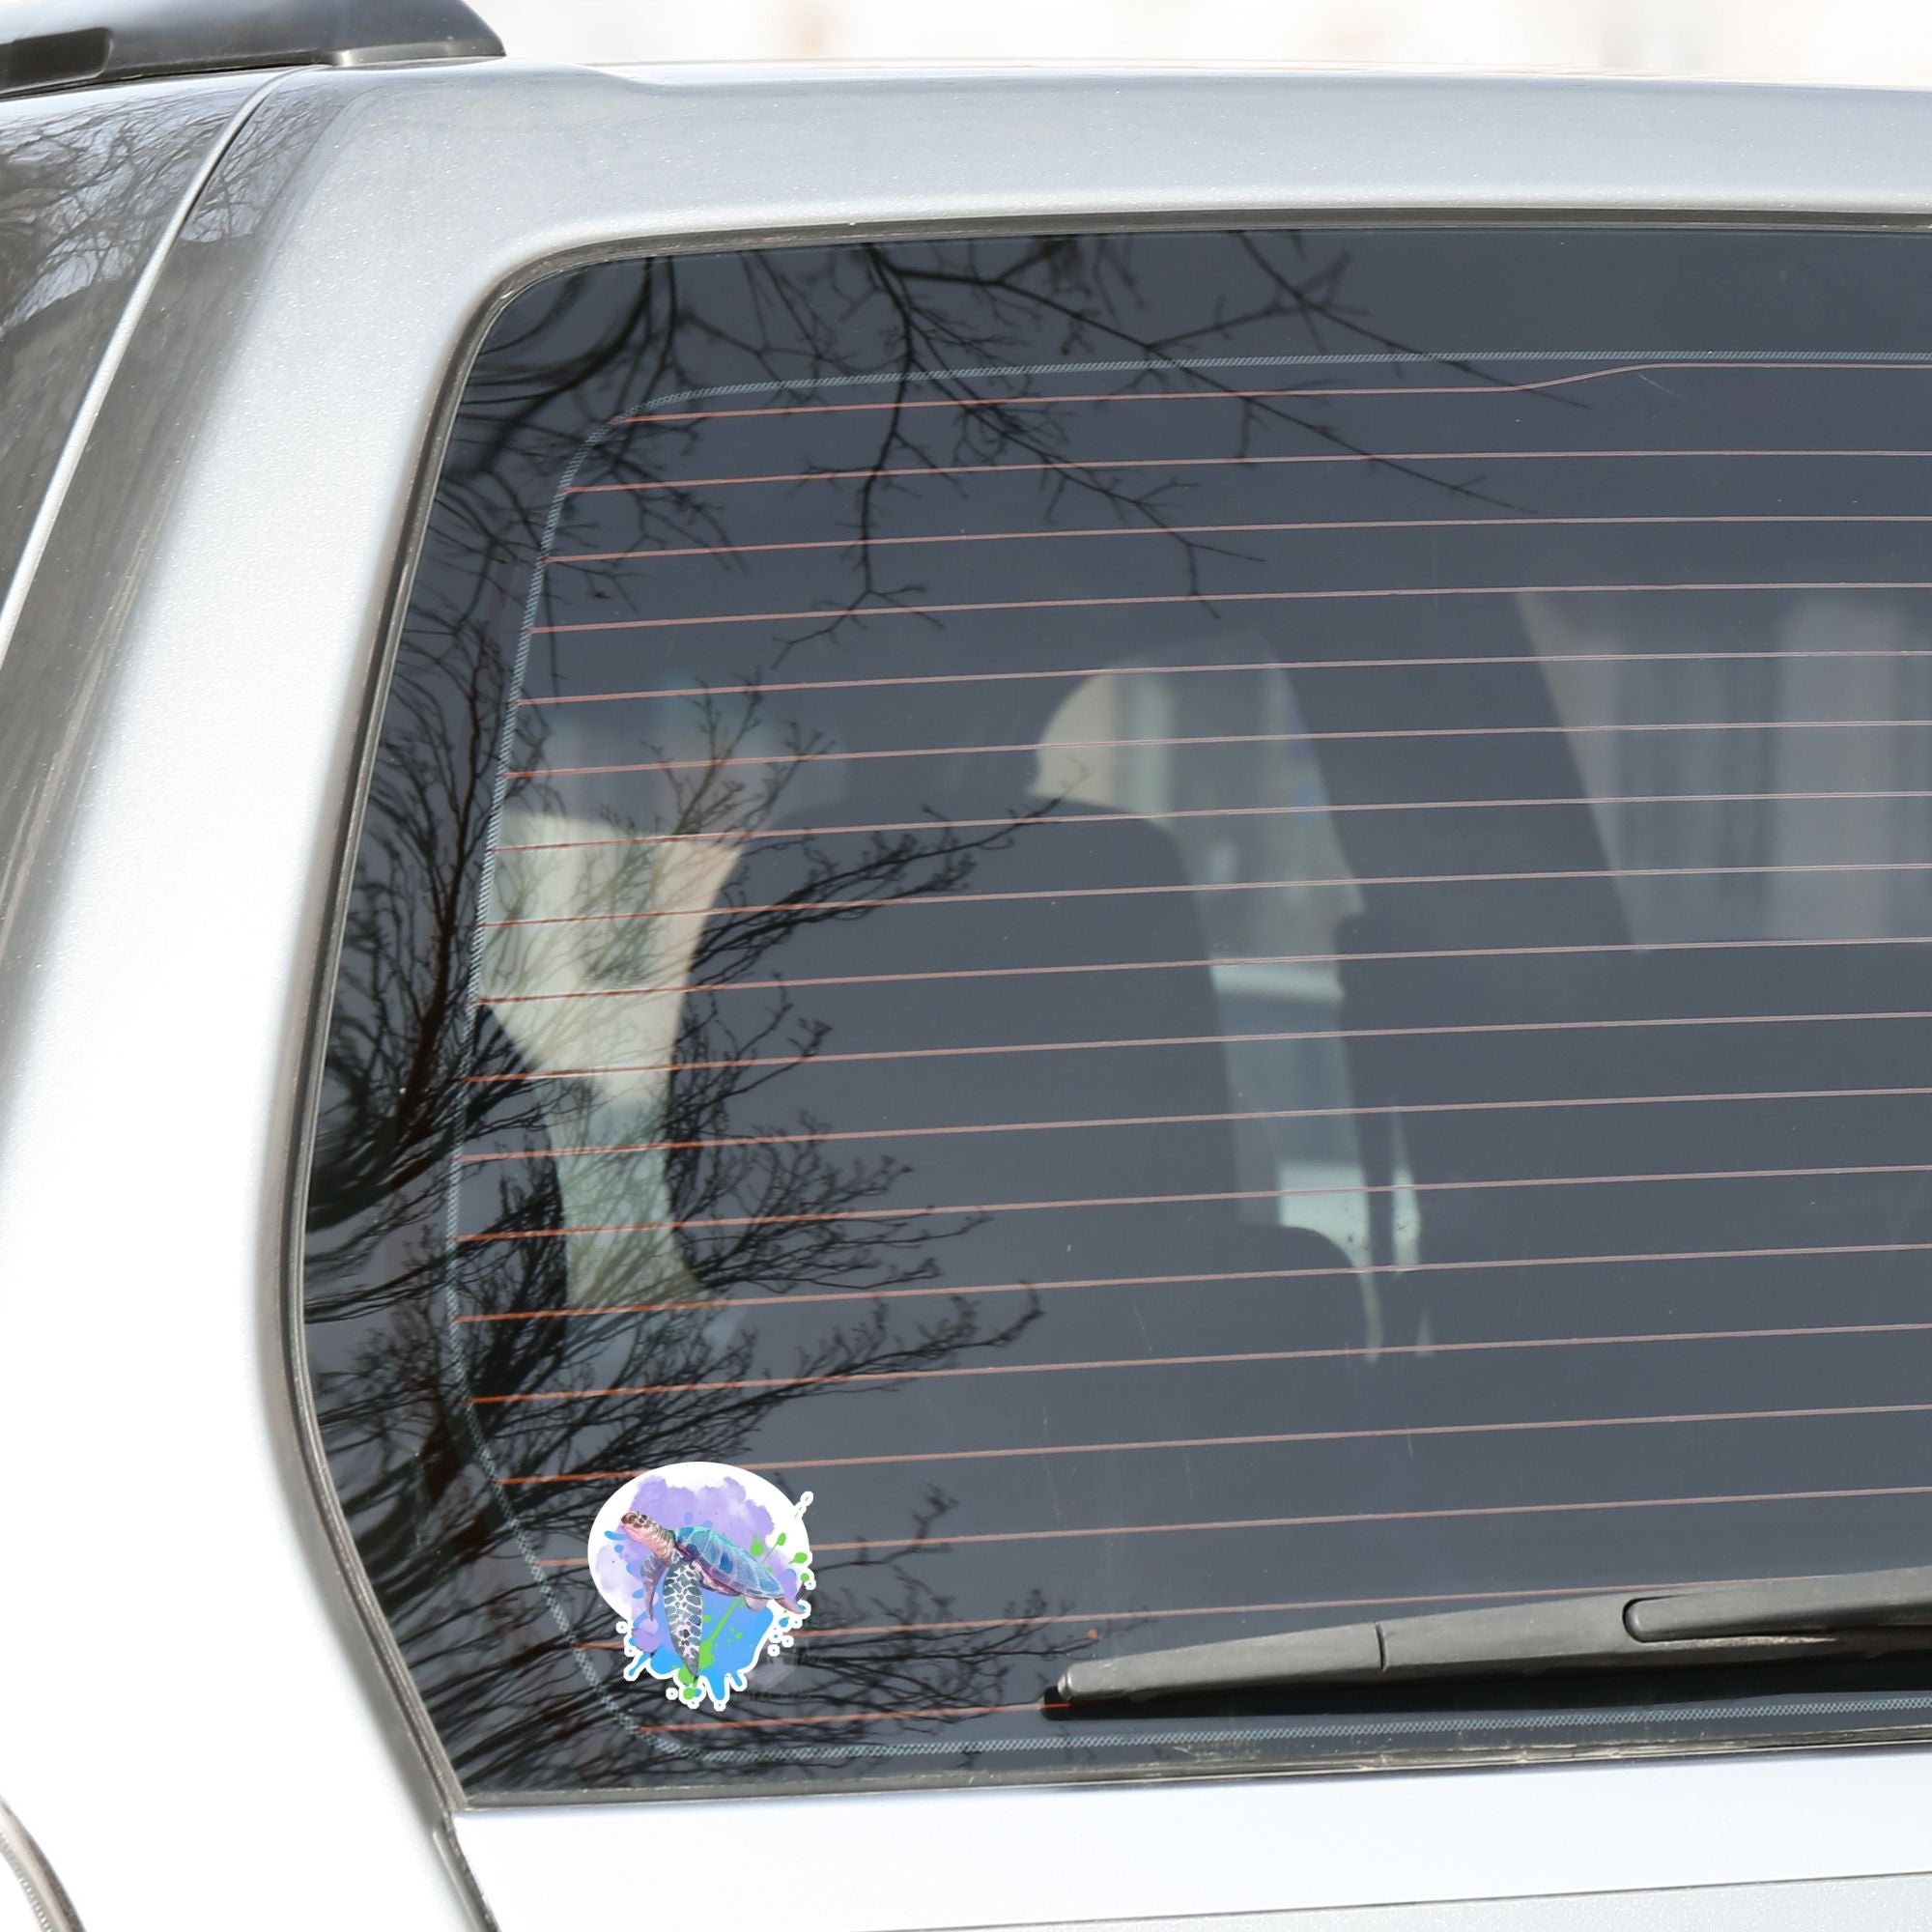 This individual die-cut sticker has a serene looking green sea turtle on a blue and purple background with splash of green. Just looking at this image is relaxing! This image shows the Watercolor Sea Turtle on the back window of a car. 